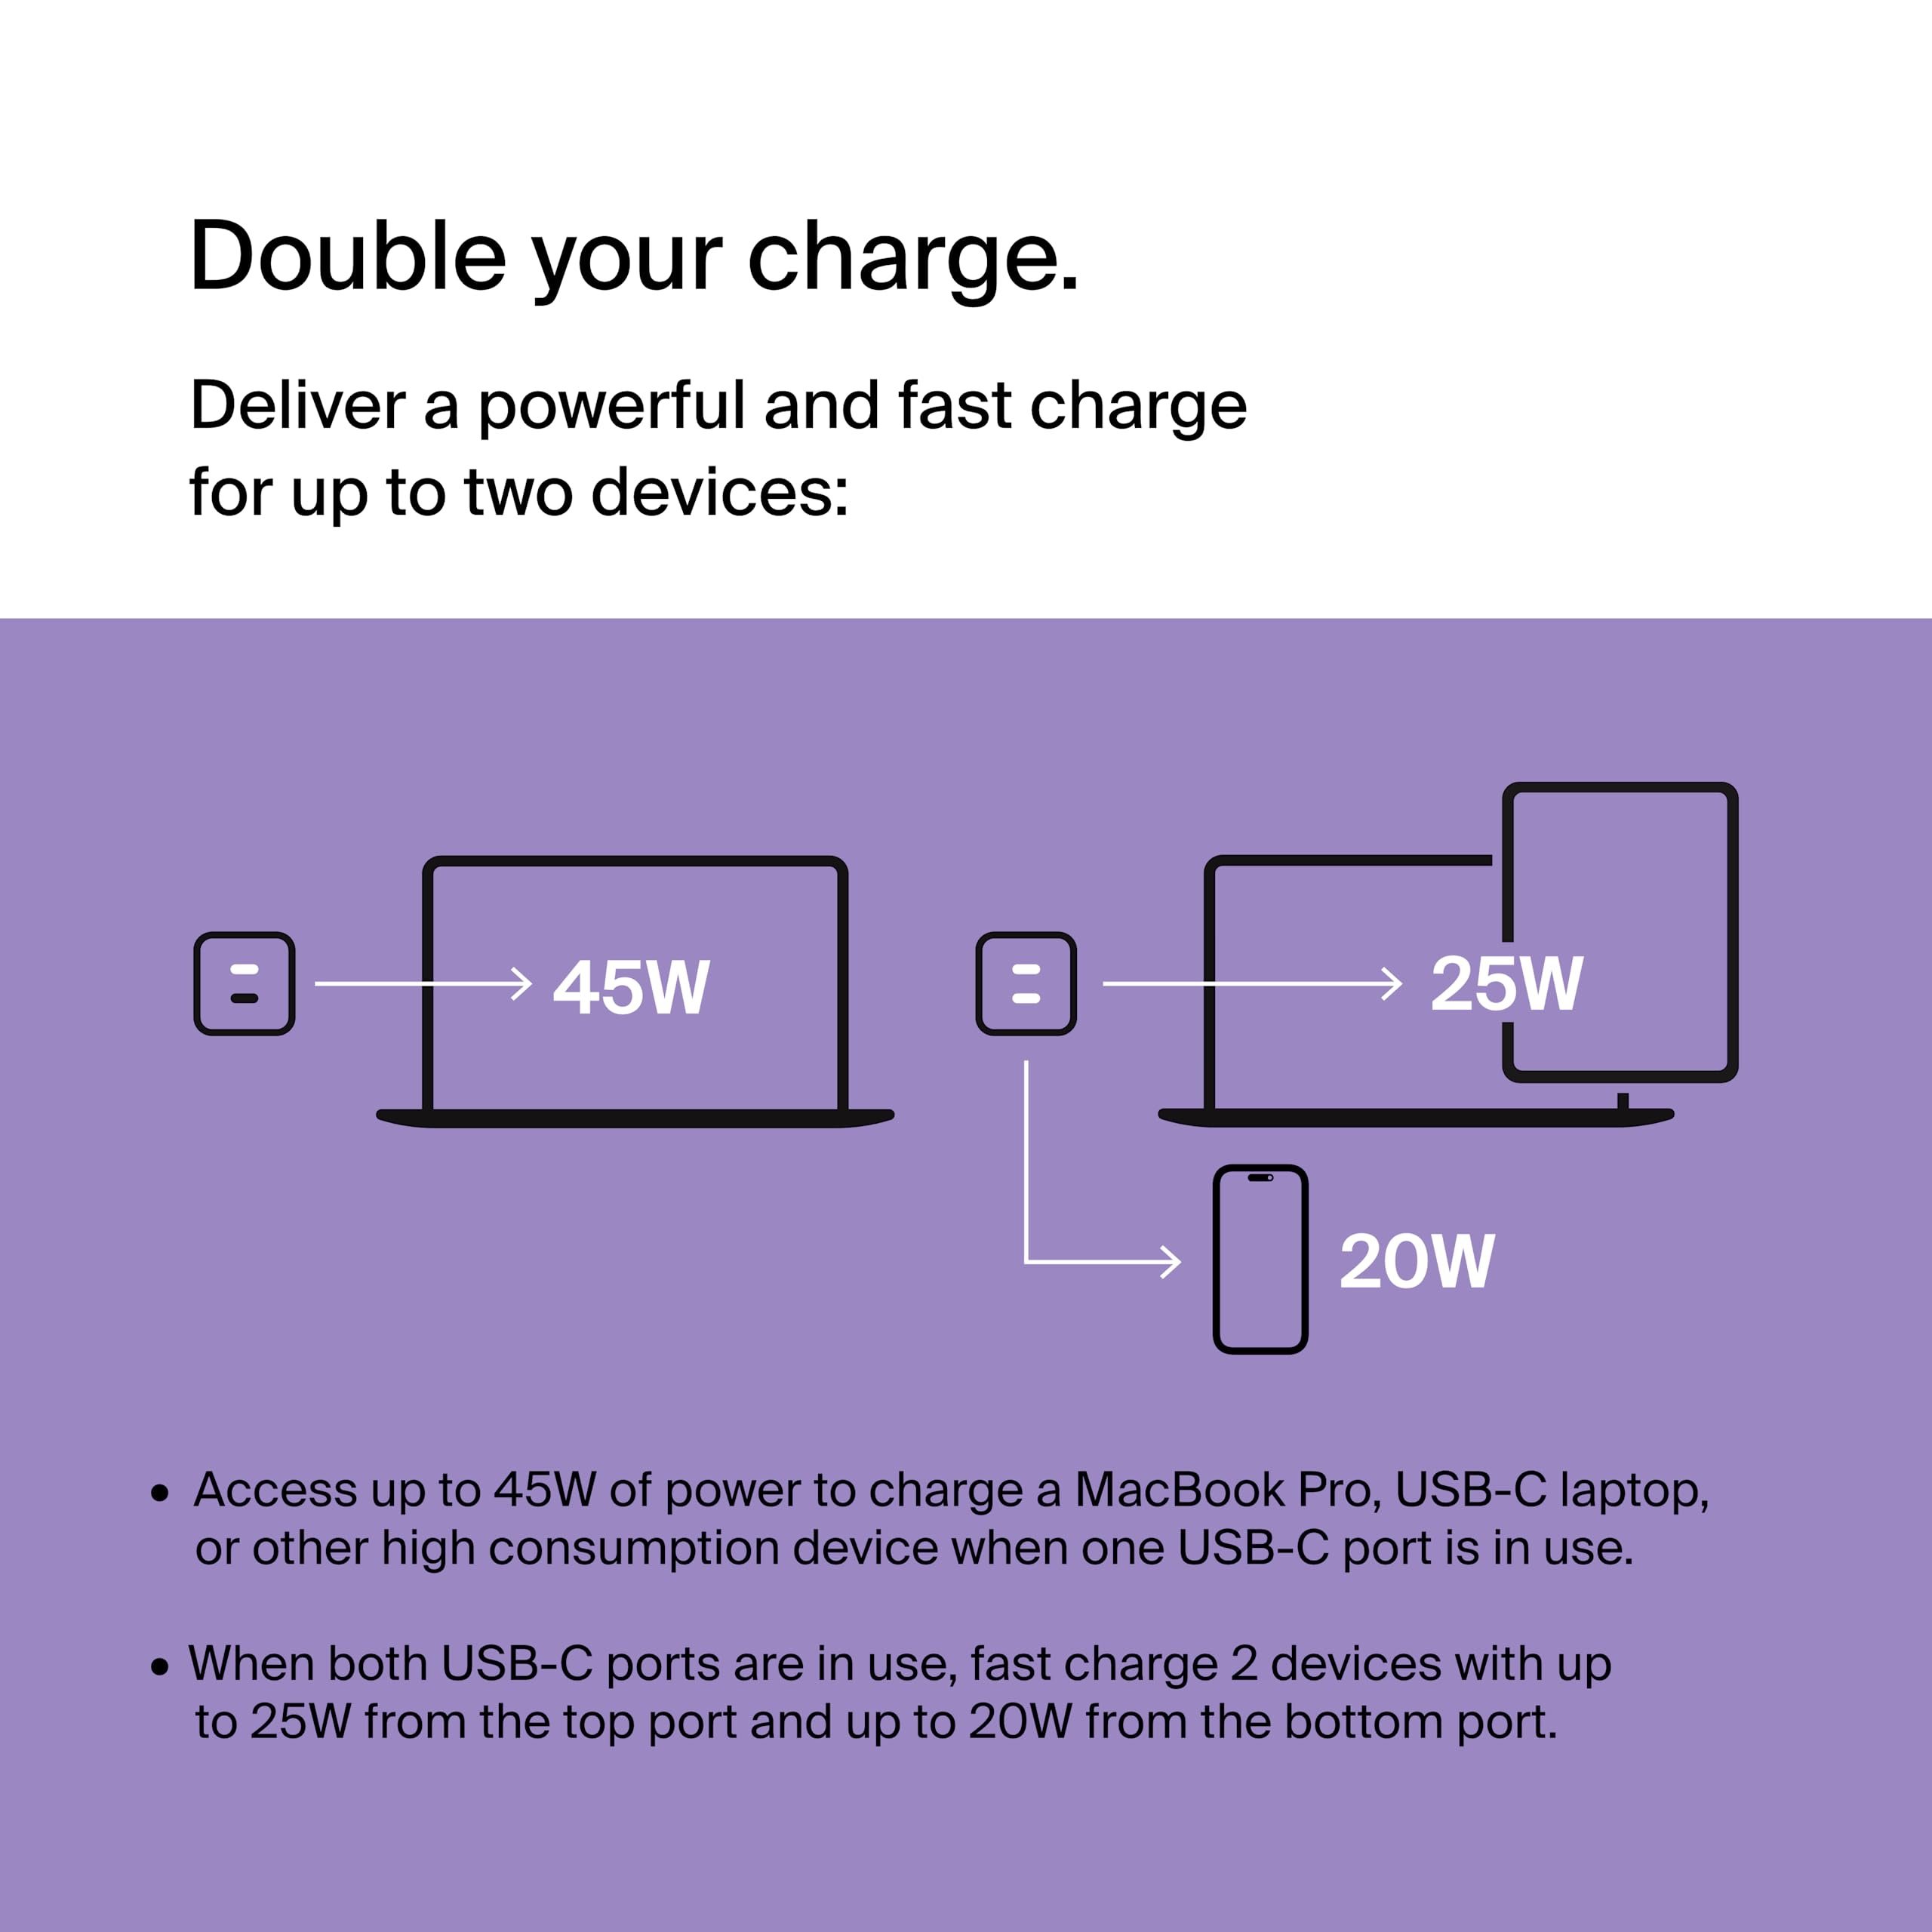 Belkin 45W Dual USB-C Wall Charger, Fast Charging Power Delivery 3.0 w/GaN Technology, iPhone 14, 13, Pro, Pro Max, Mini, iPad Pro 12.9, MacBook, Galaxy S23, S23+, Ultra, Tablet - Black (2-Pack)